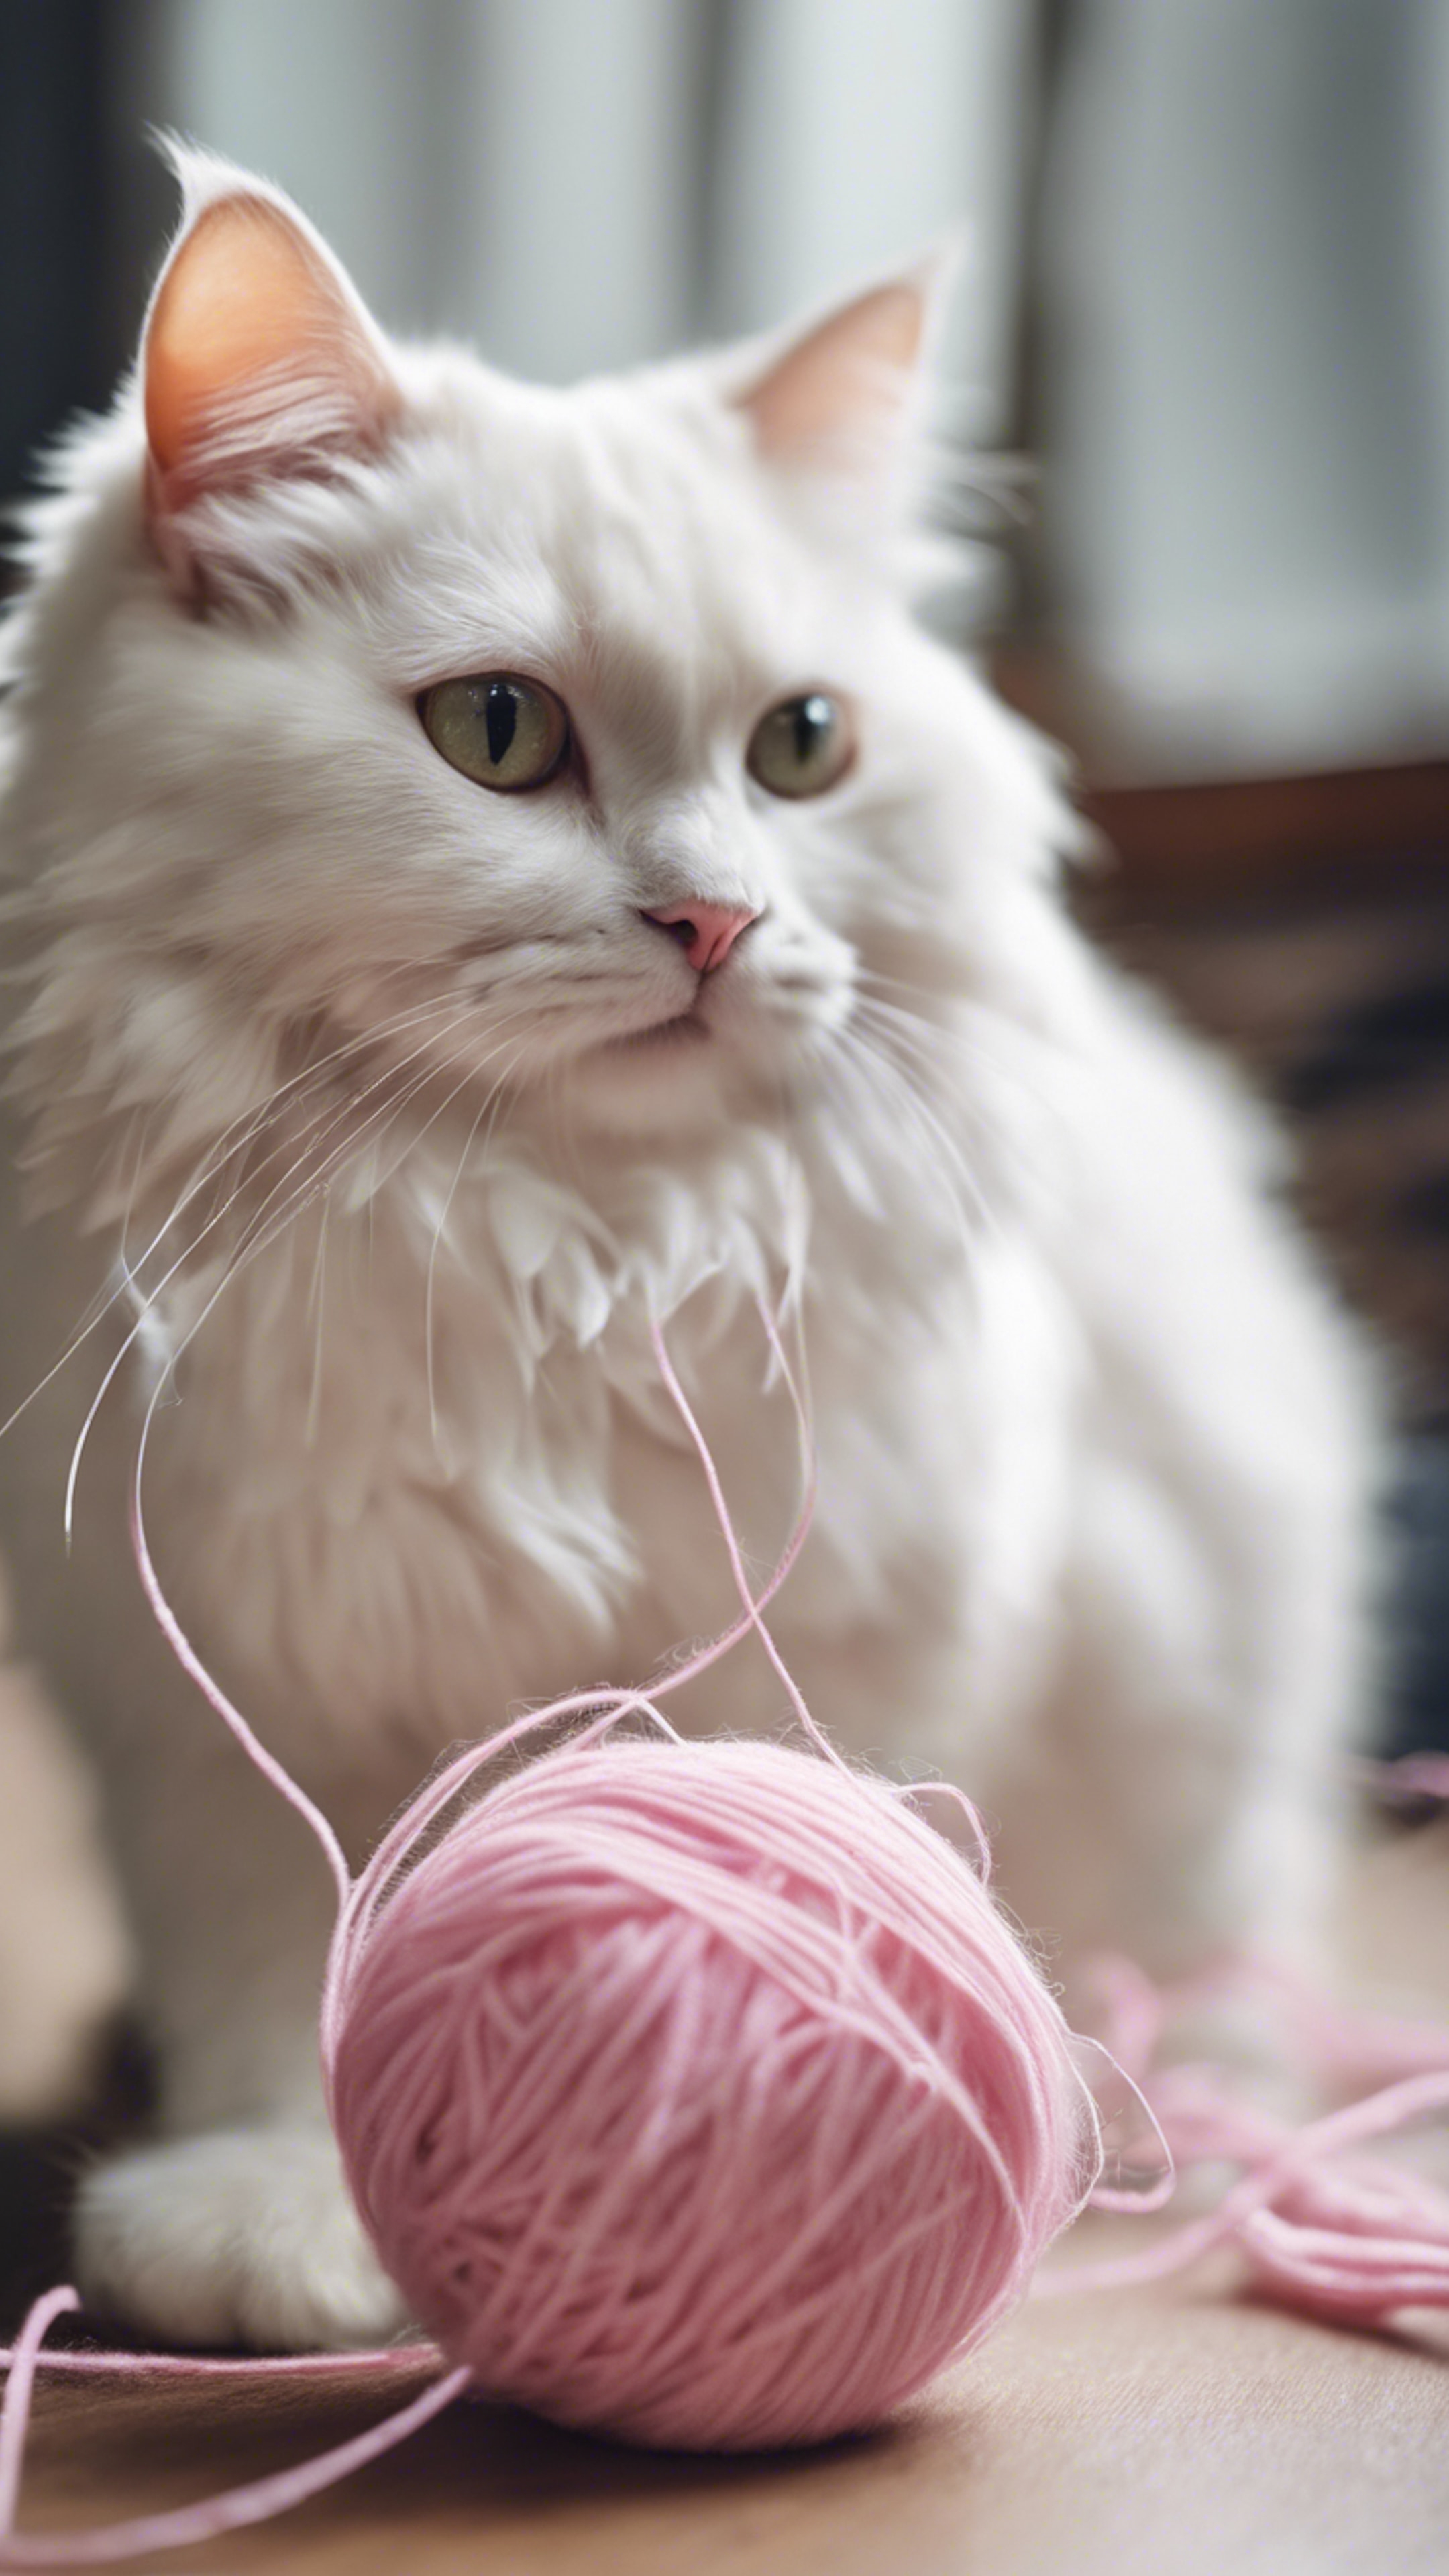 An adorable white cat, fluff all around, playing with a pink ball of yarn. Ფონი[2f9056787526421e963d]